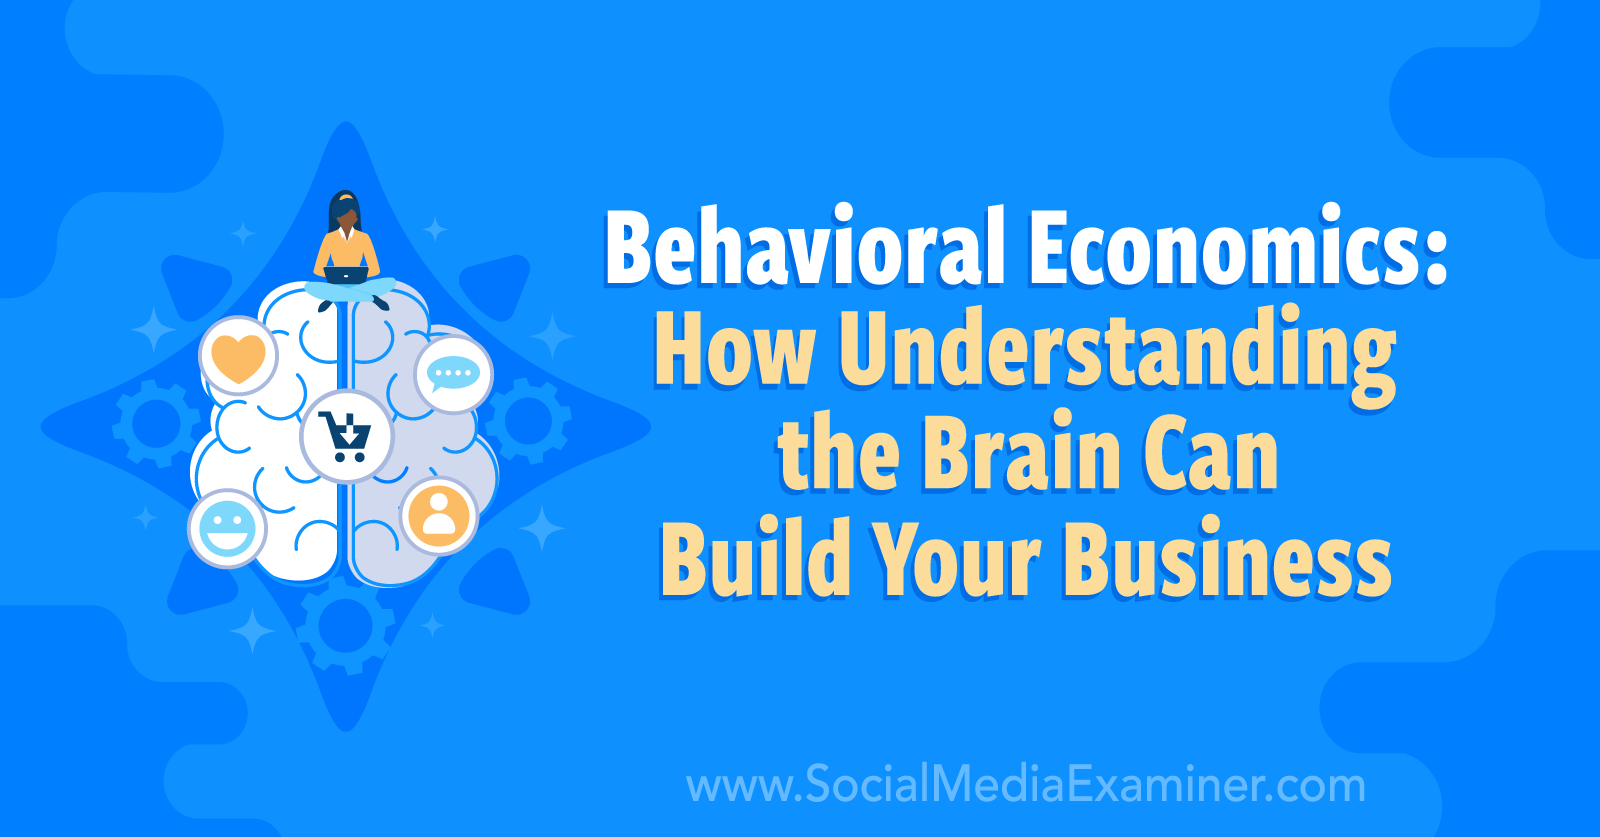 Behavioral Economics: How Understanding the Brain Can Build Your Business by Social Media Examiner